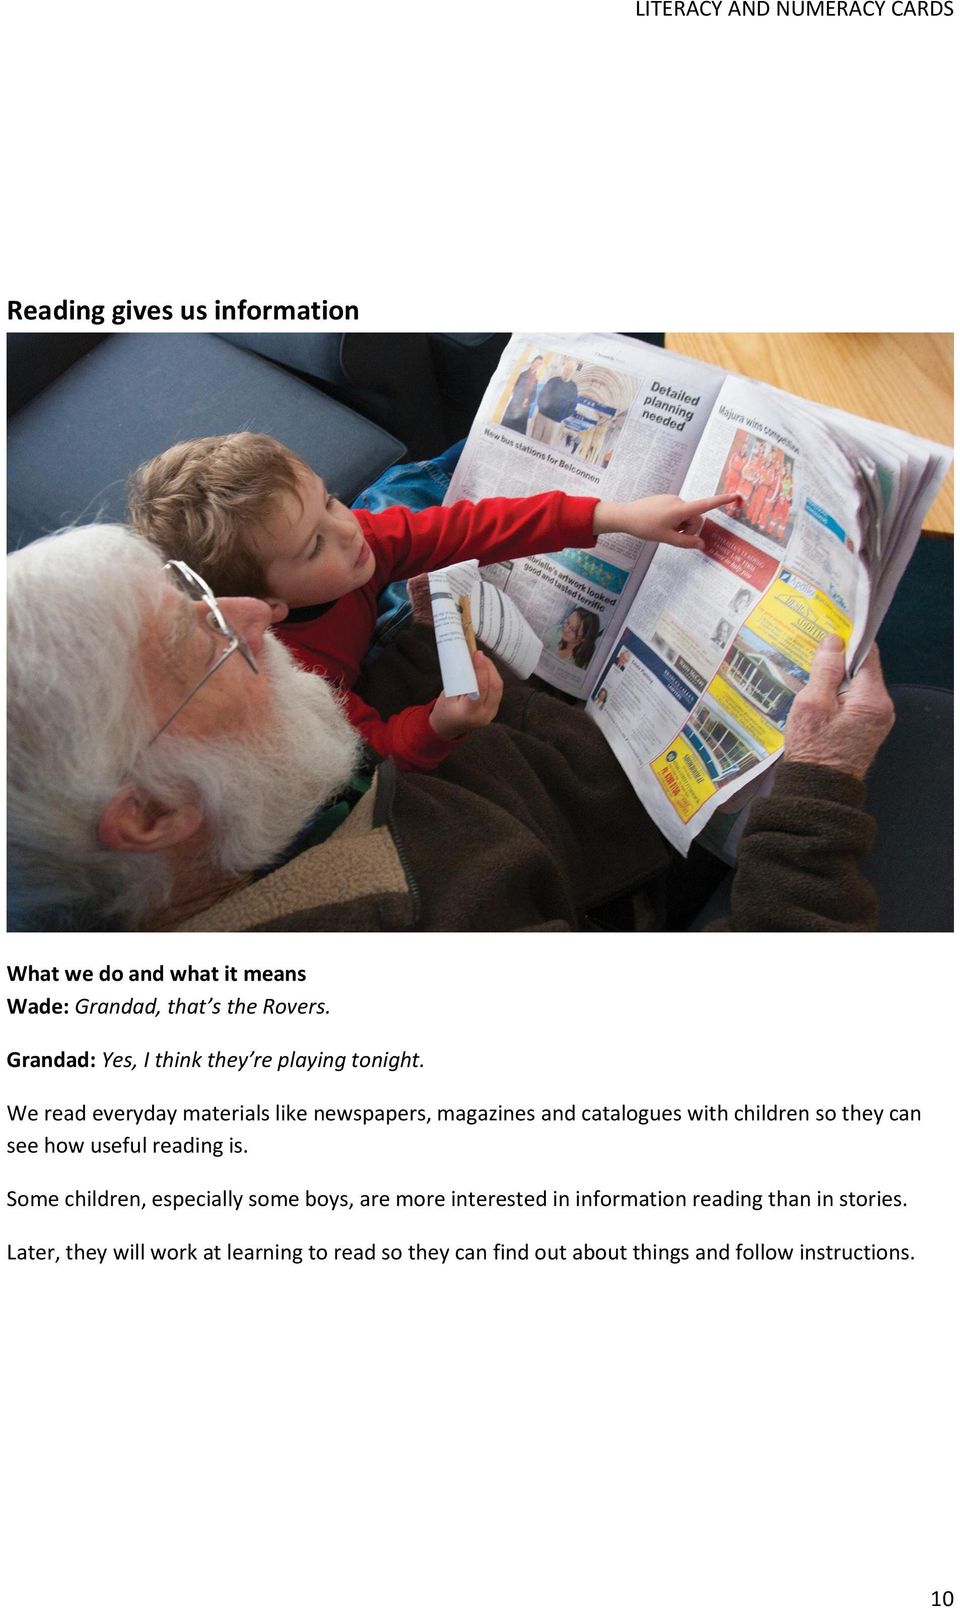 We read everyday materials like newspapers, magazines and catalogues with children so they can see how